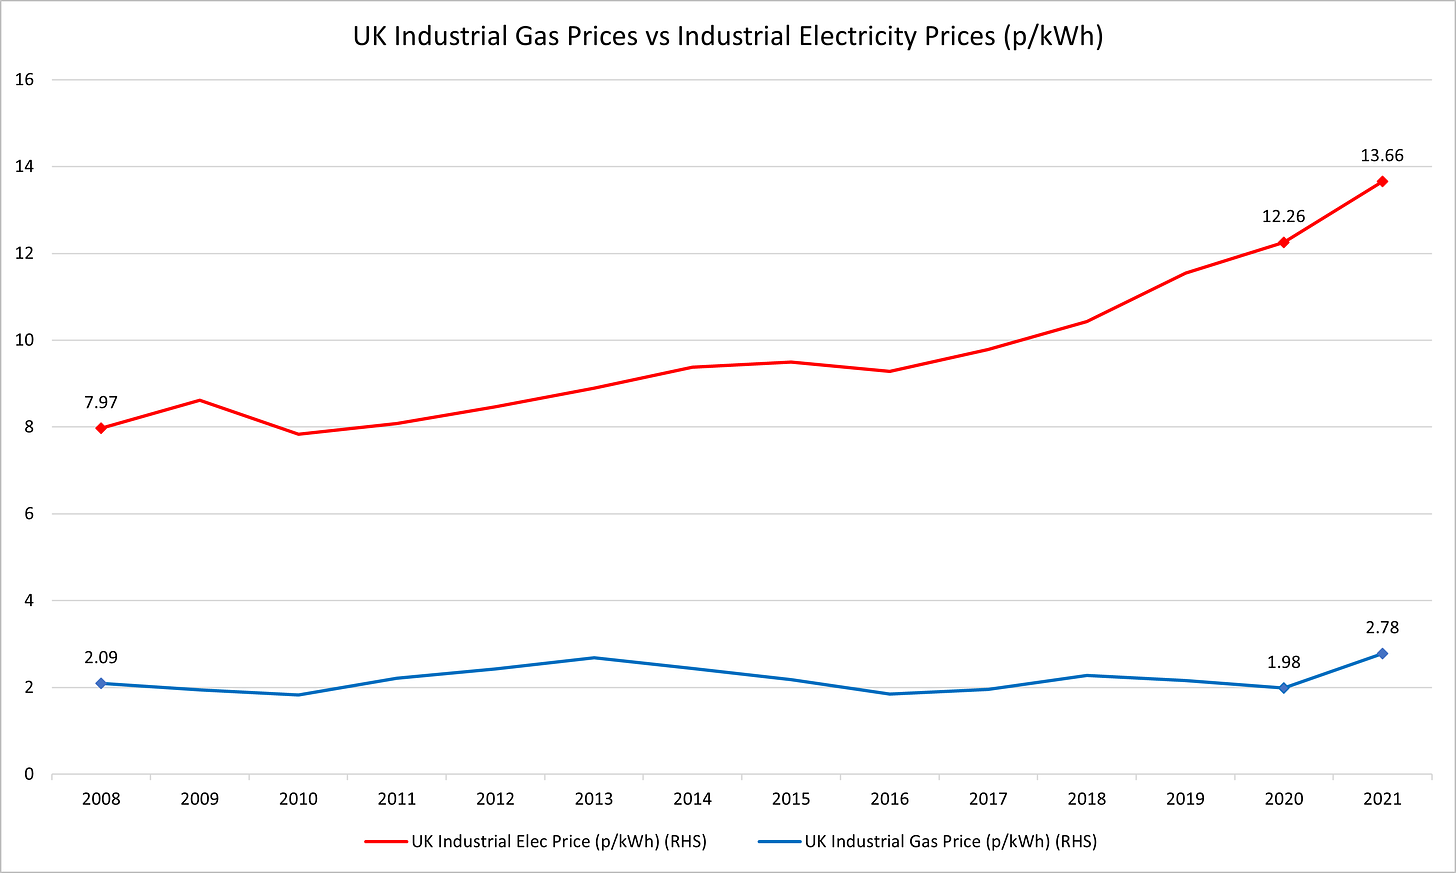 Hidden Costs of Renewables: UK Industrial Gas and Electricity Prices 2008-2021